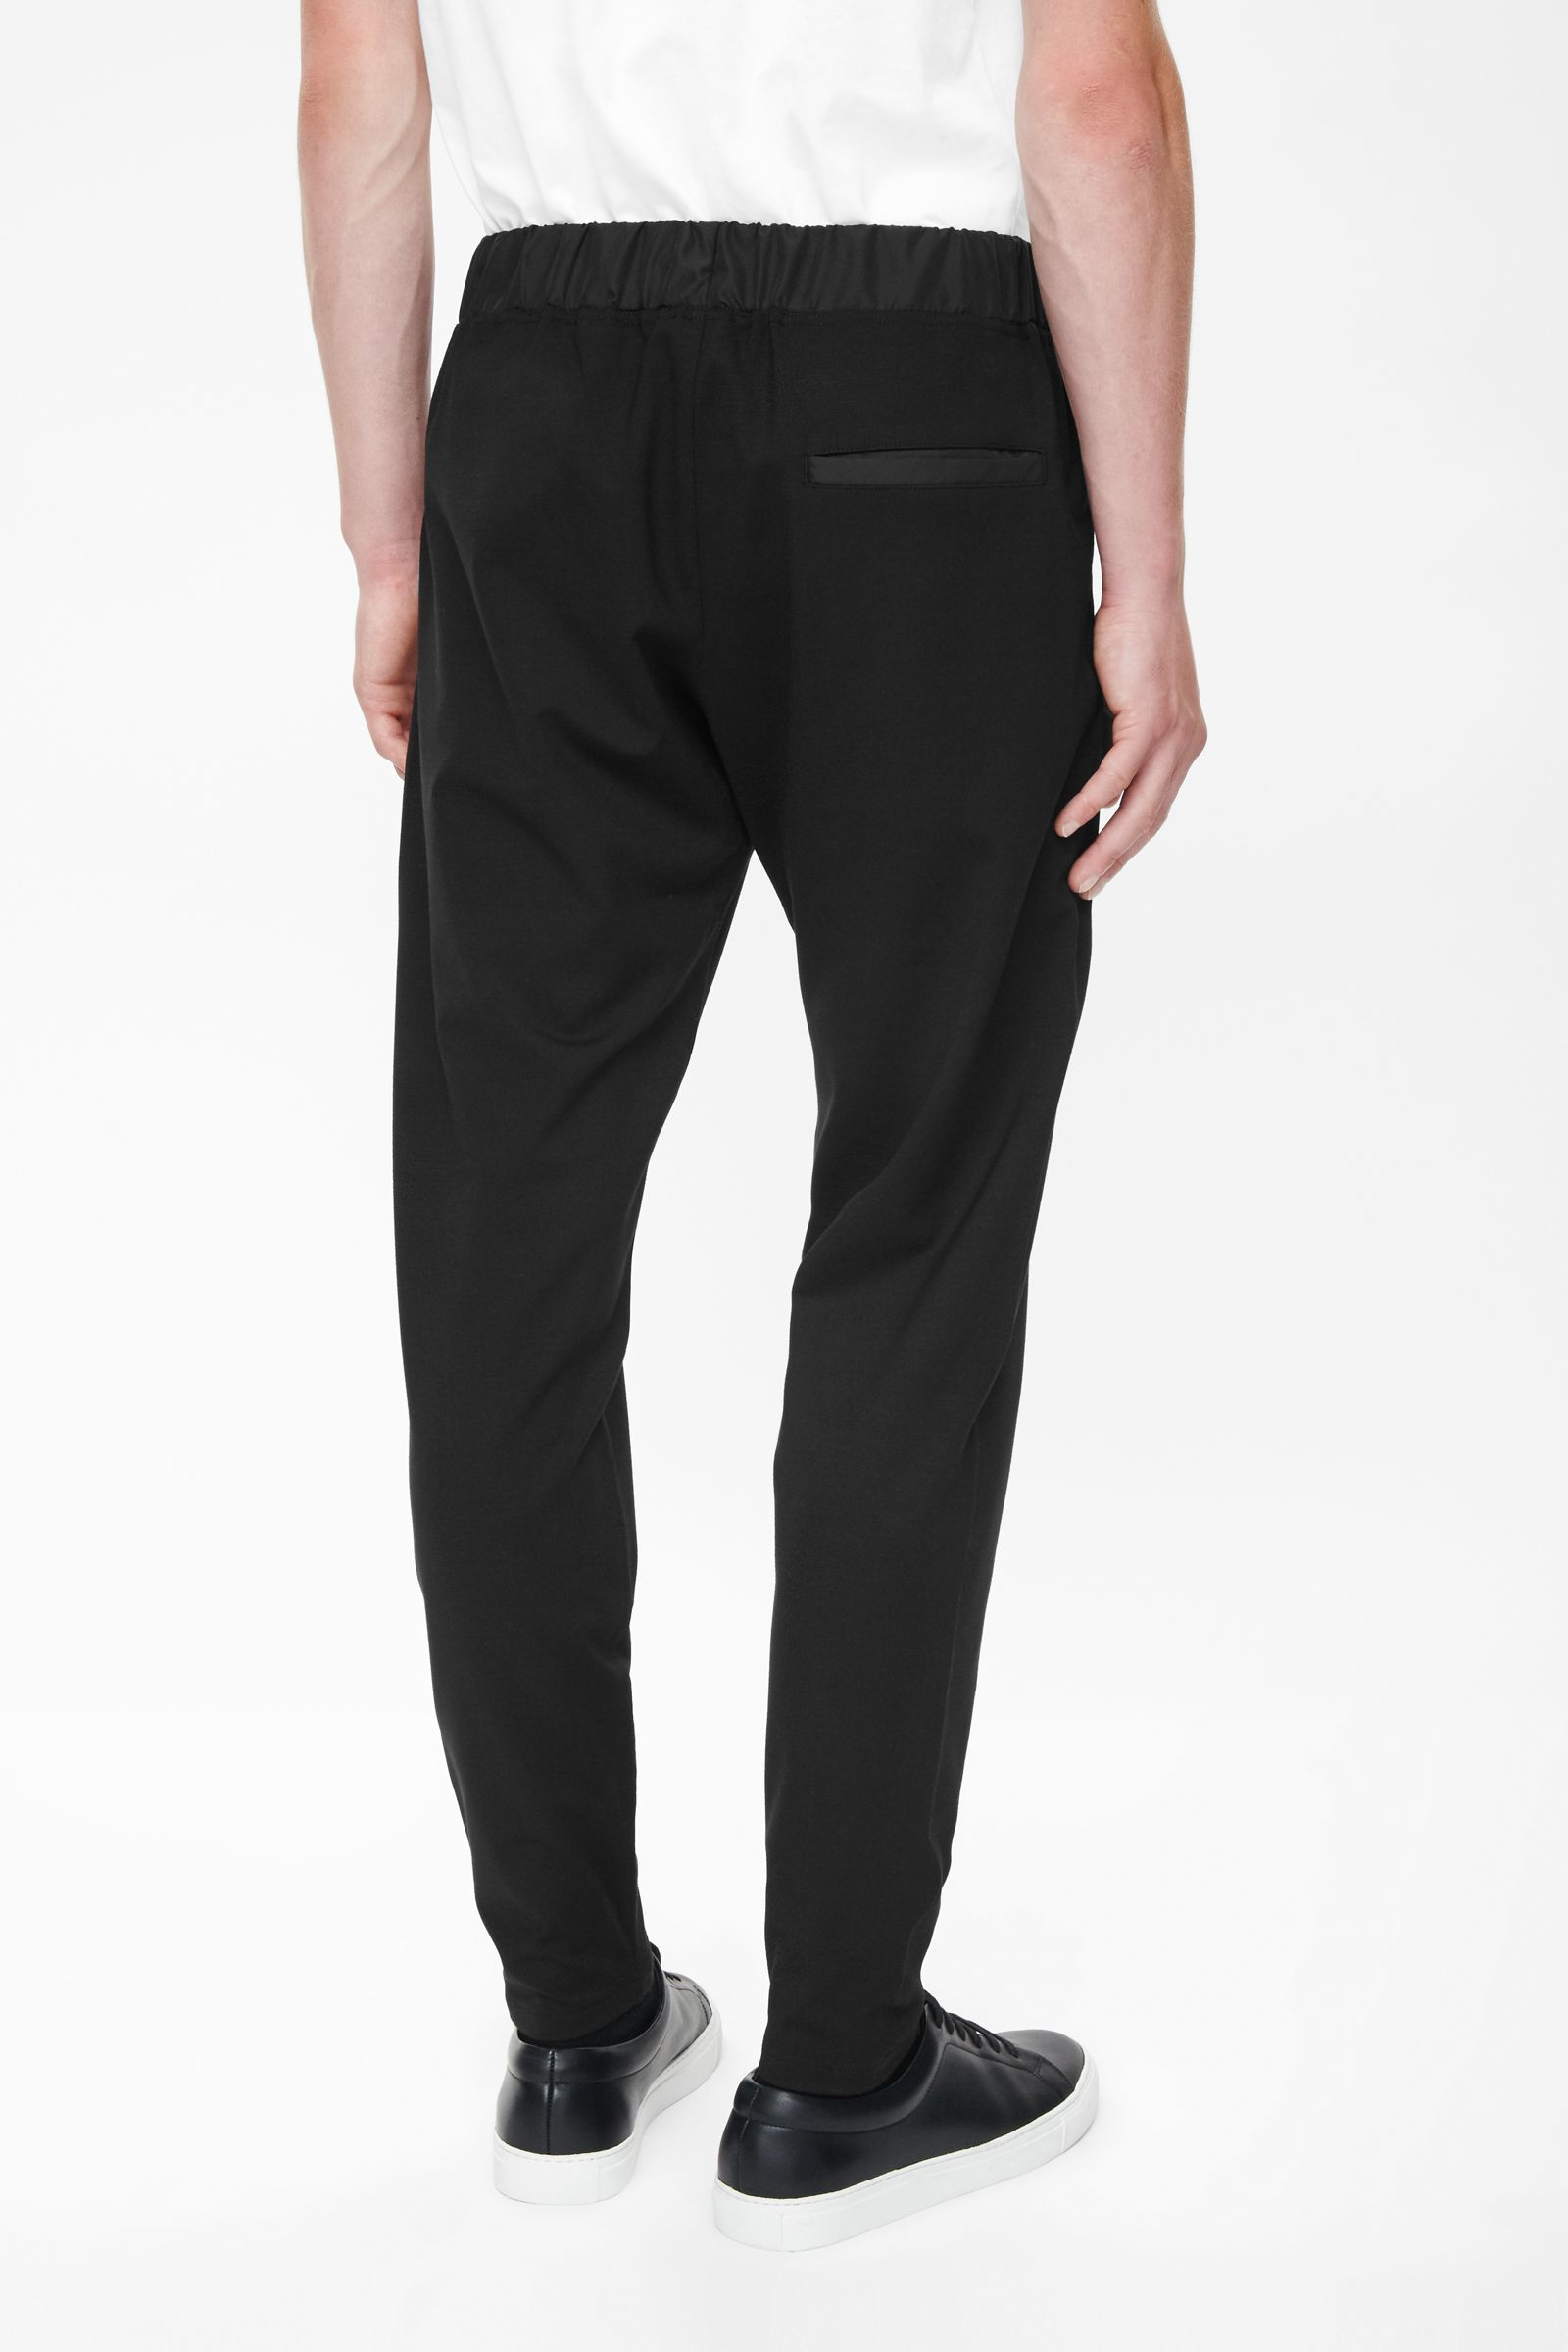 Cos Front Pocket Zip Trousers in Black for Men | Lyst